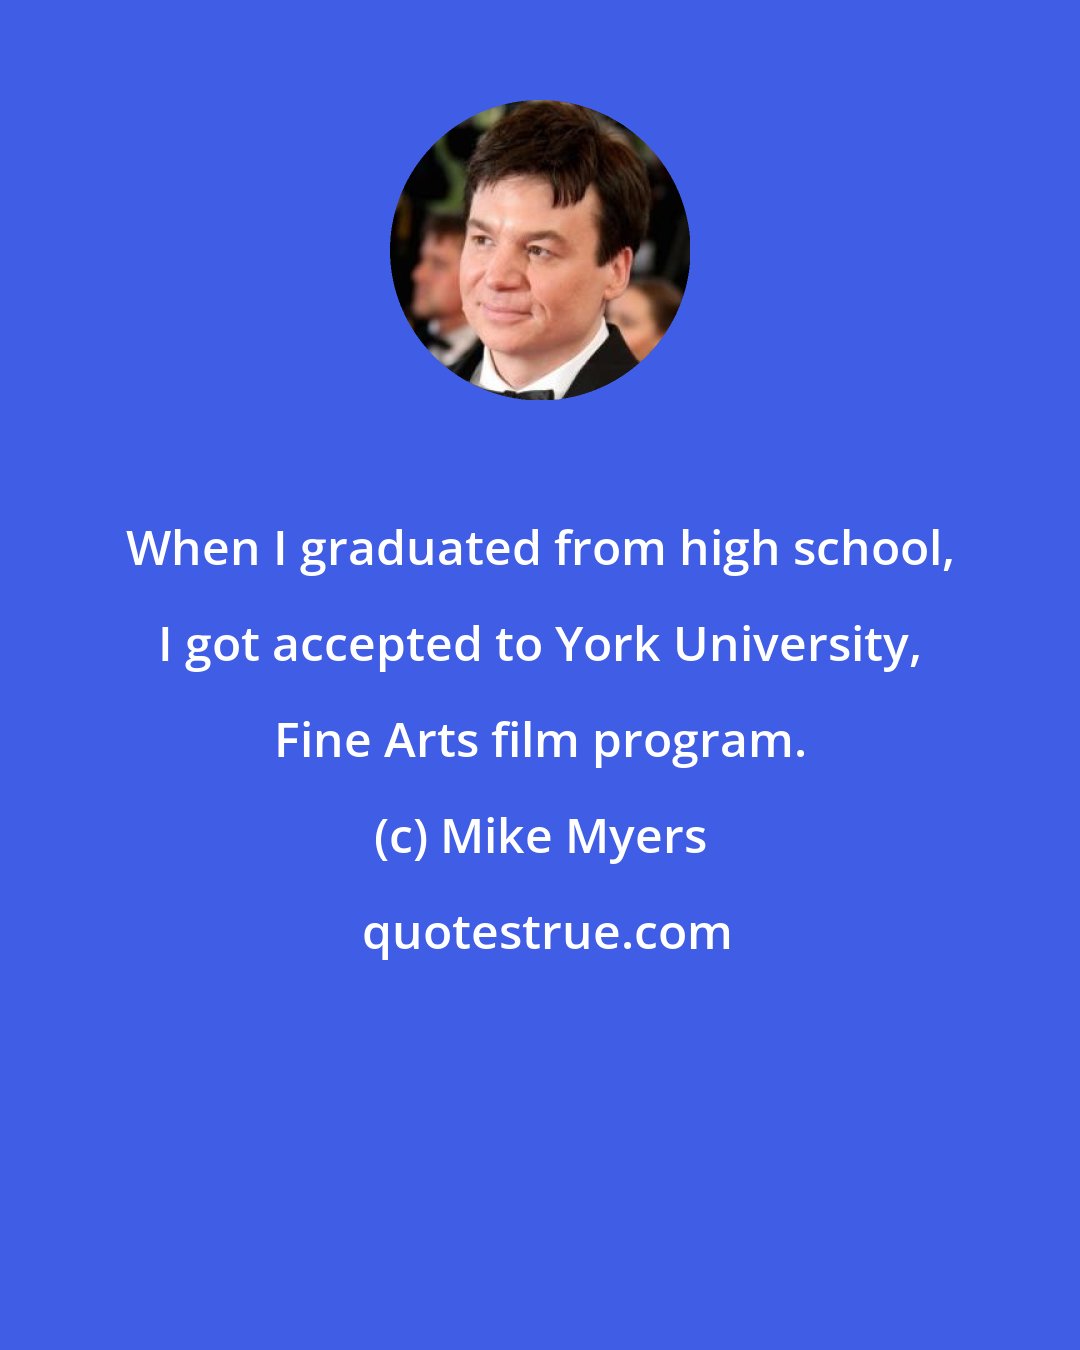 Mike Myers: When I graduated from high school, I got accepted to York University, Fine Arts film program.